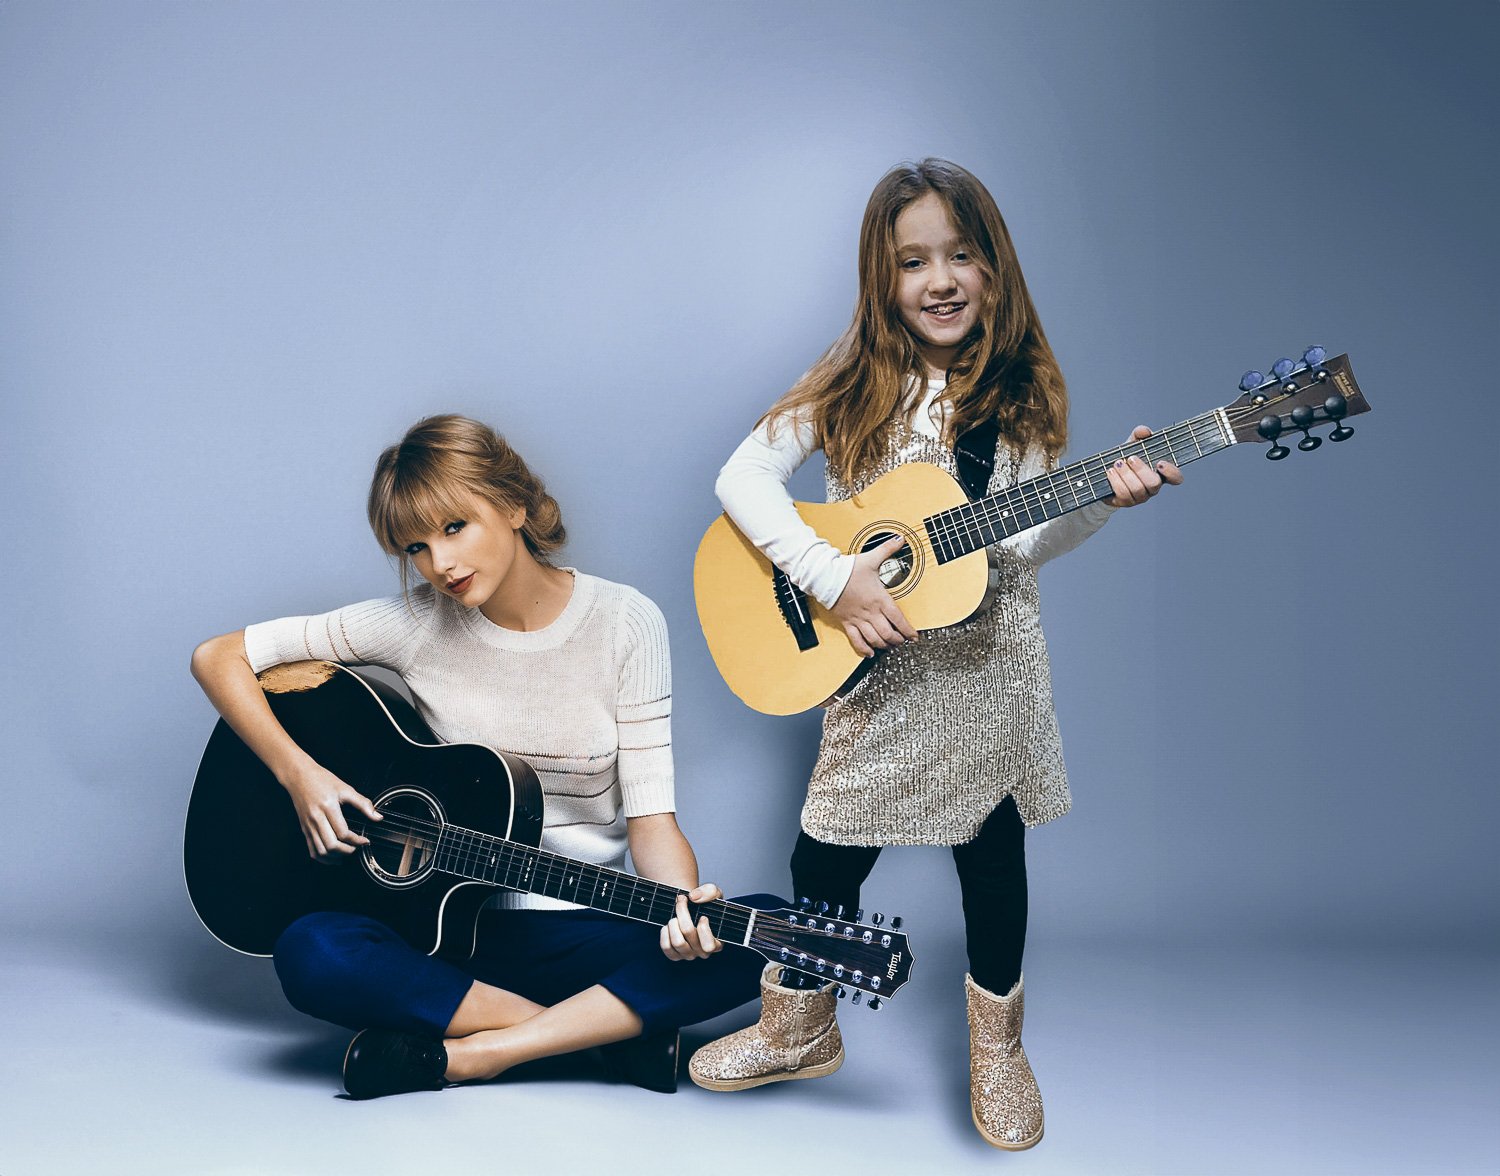 A young girl holding a guitar standing next to Taylor Swift